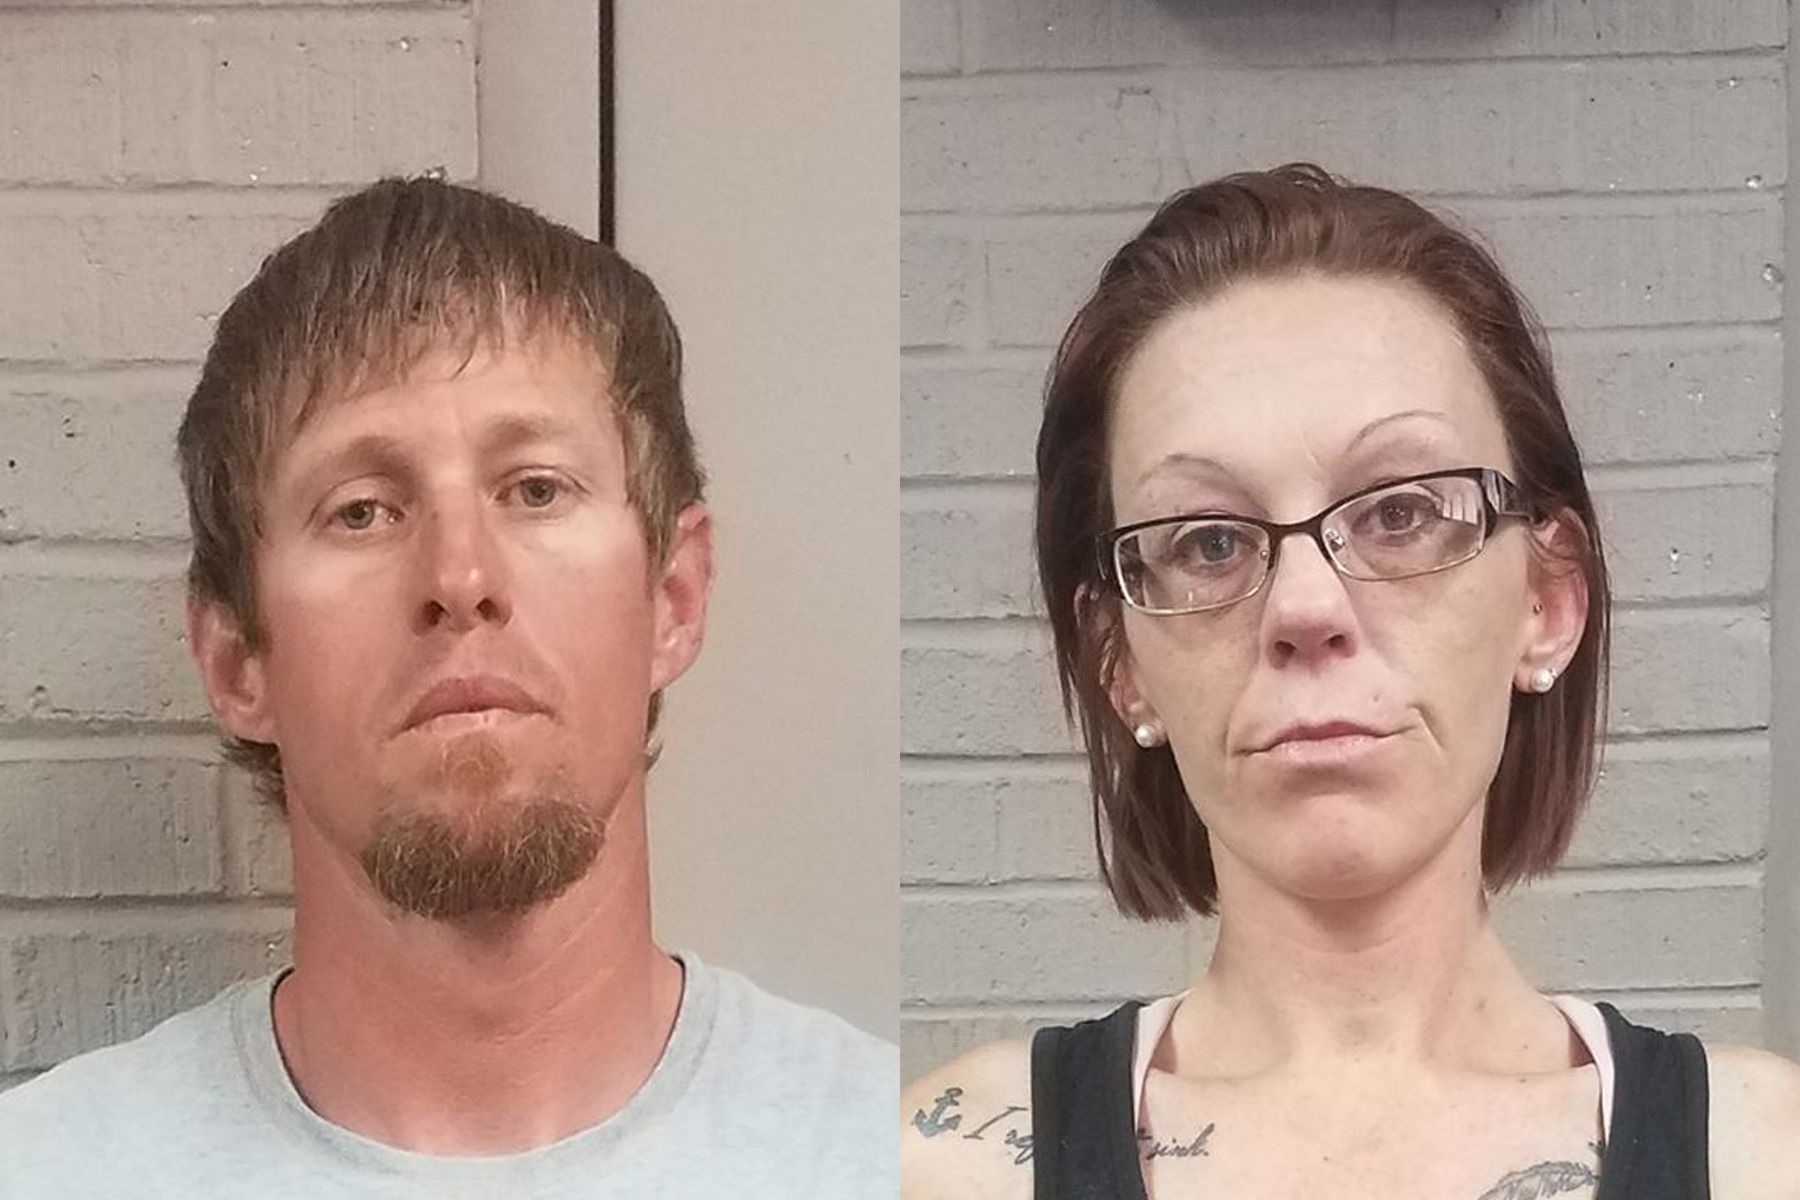 Couple Arrested After Allegedly Filming Themselves Having Sex At A Library, Walmart, And Burger King Then Uploading Video To PornHub News photo